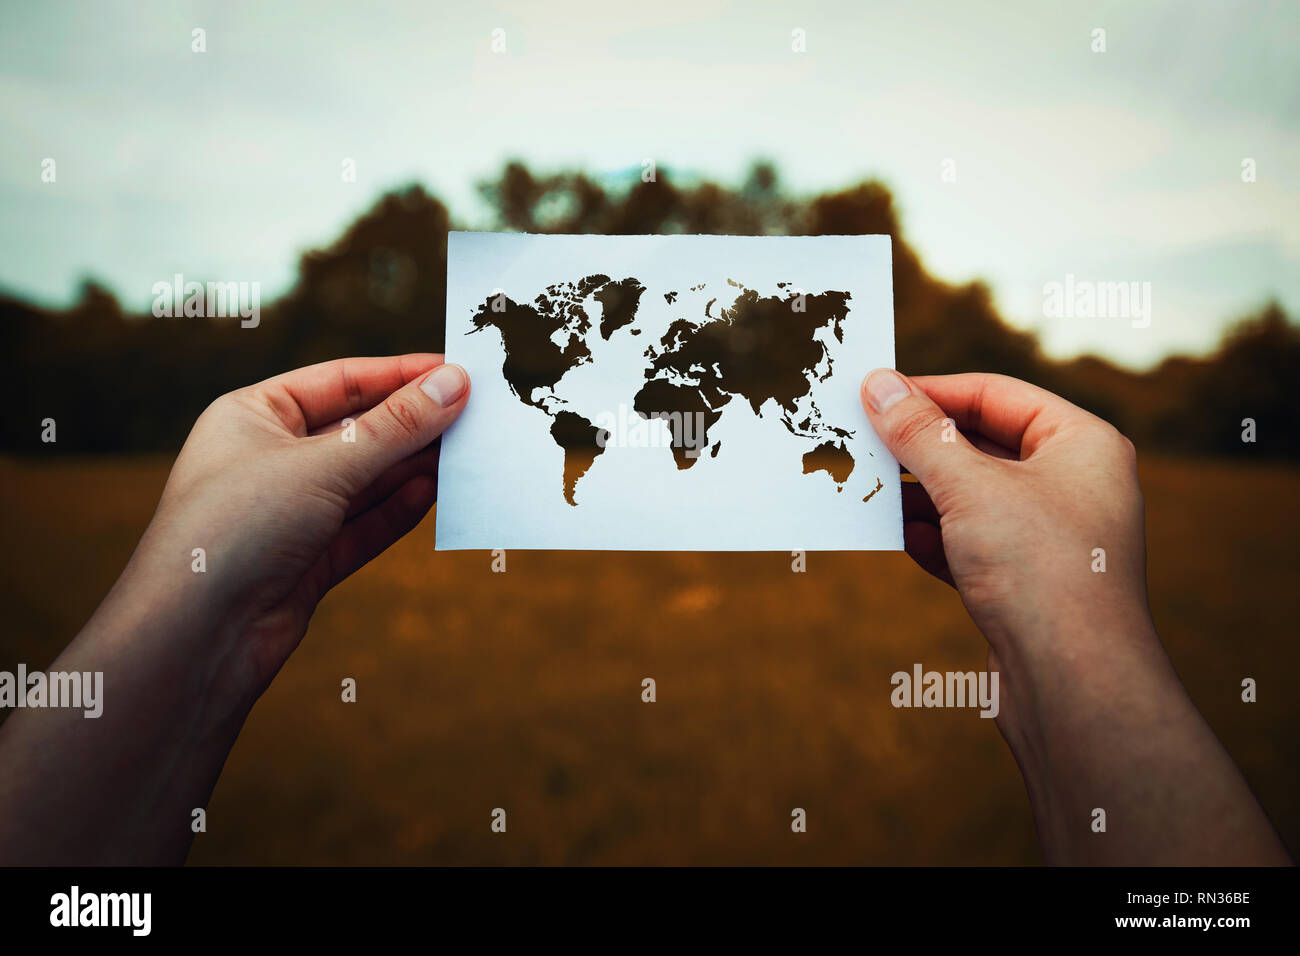 Climate change problem, destruction of nature concept. Human hands holding a paper sheet with world map icon over a dry grass field background. Global Stock Photo